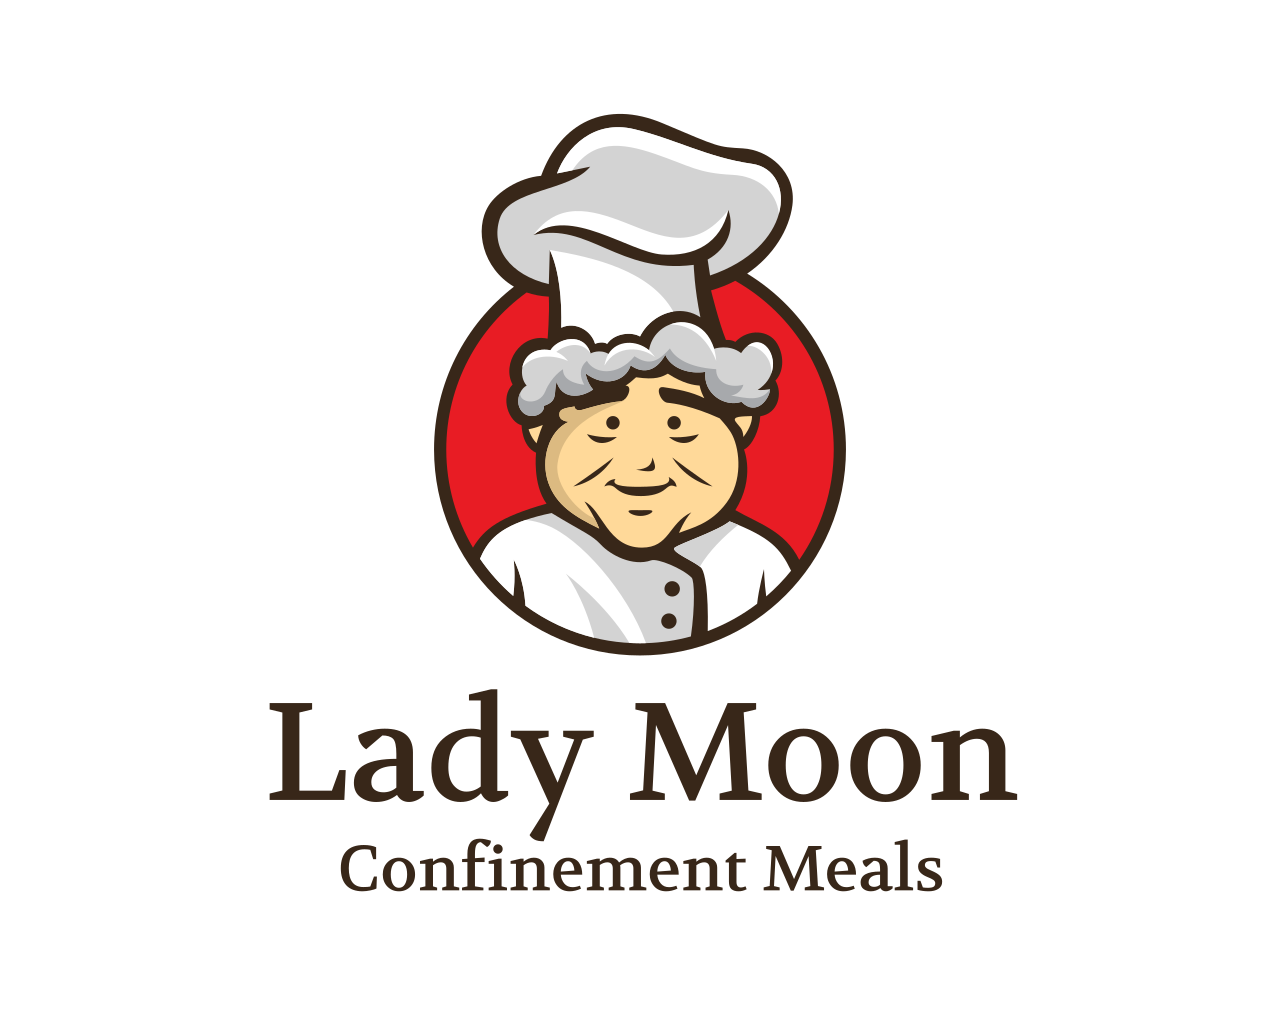 Ladymoon Confinement Meal